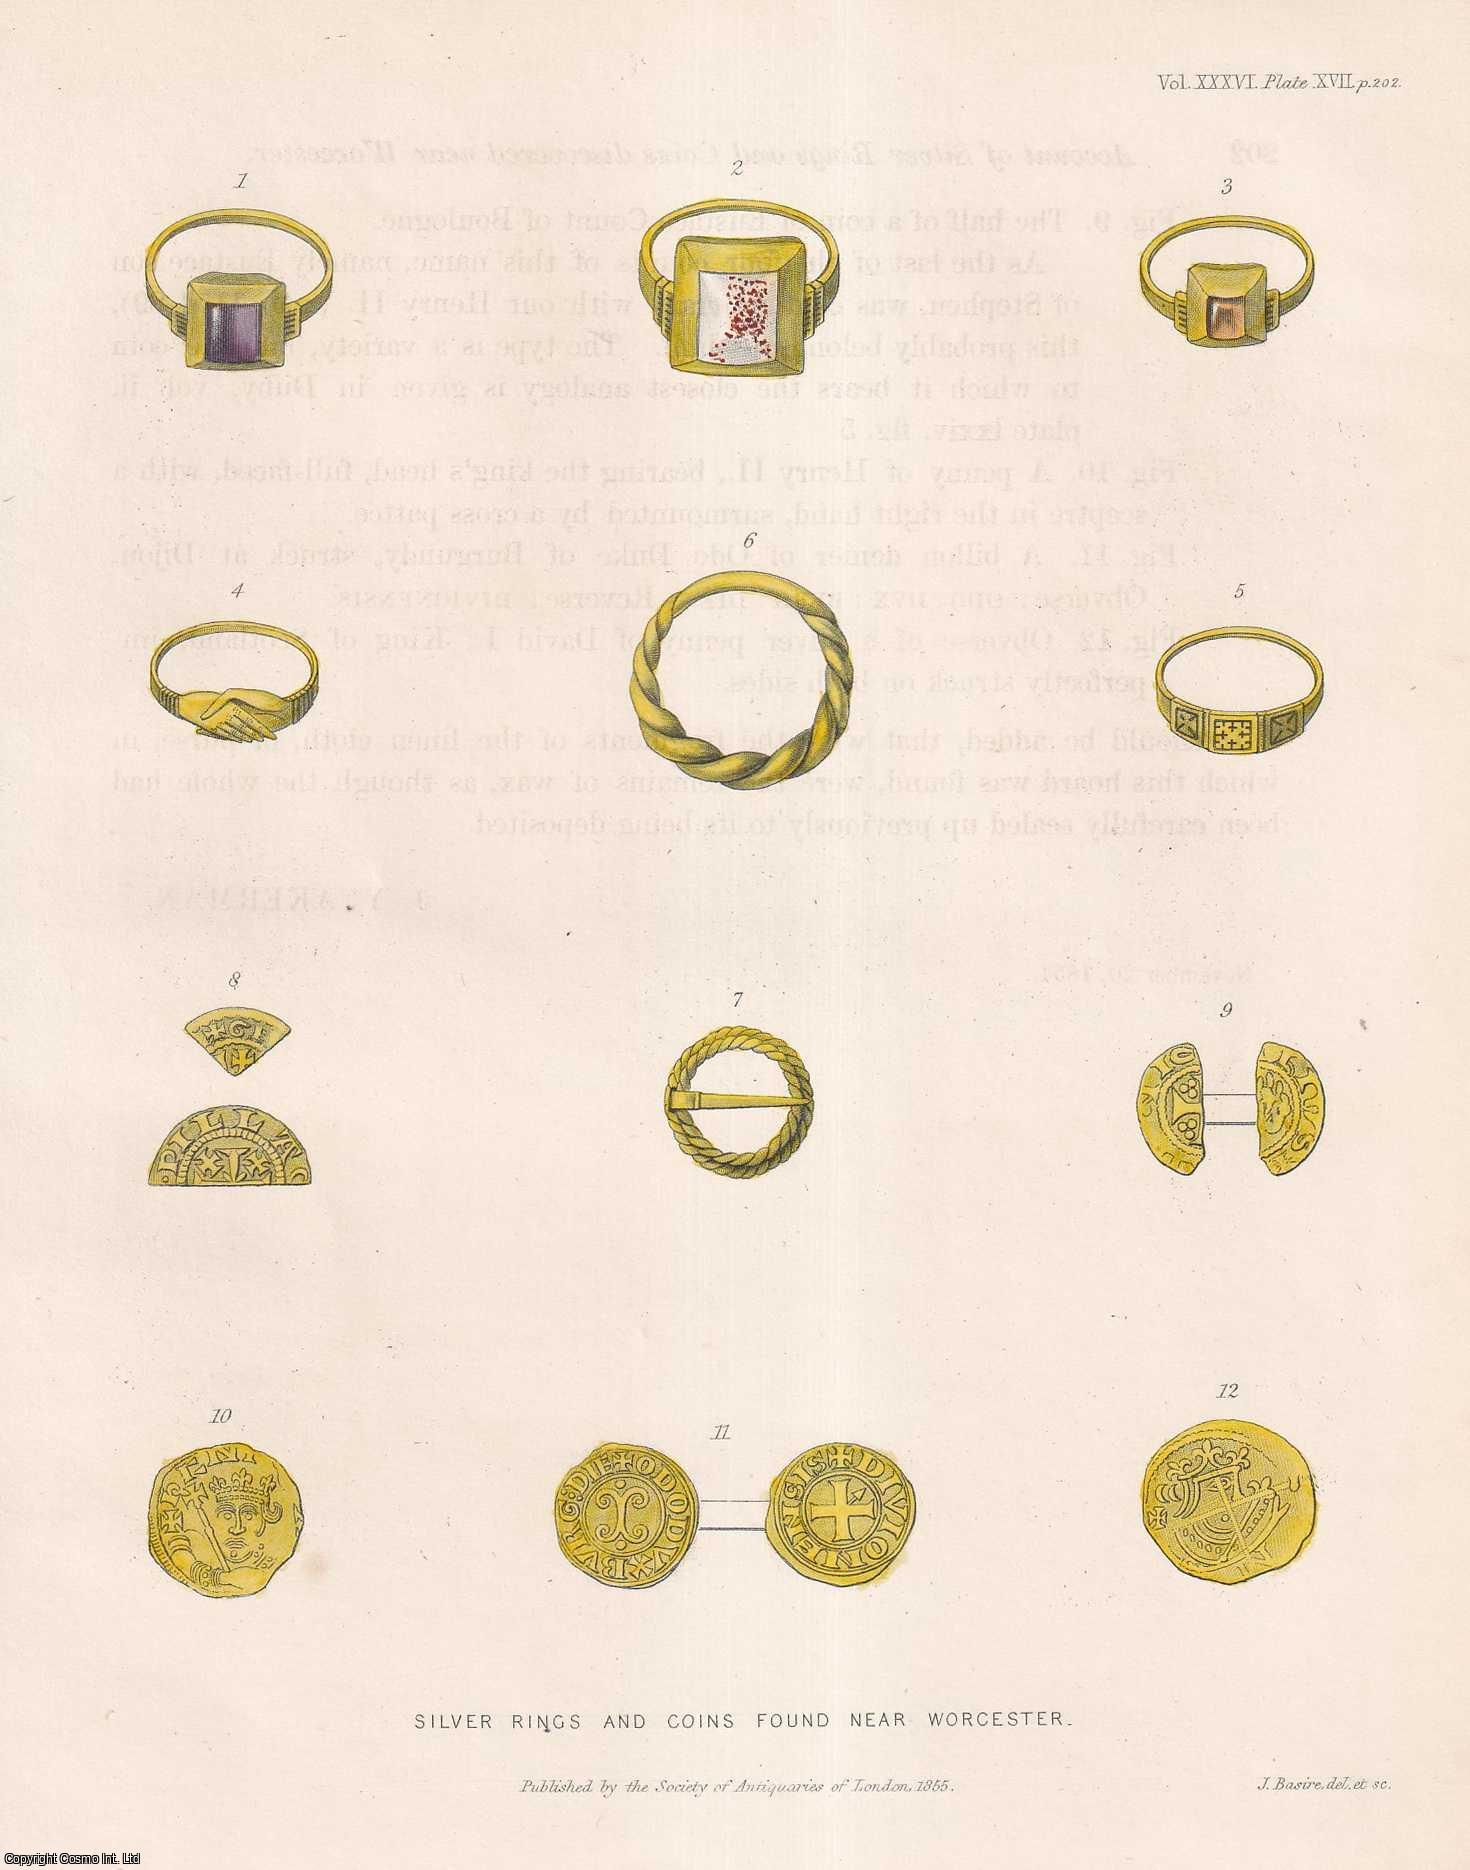 John Yonge Akerman - Account of Silver Rings and Coins discovered near Worcester. An uncommon original article from the journal Archaeologia, 1855.